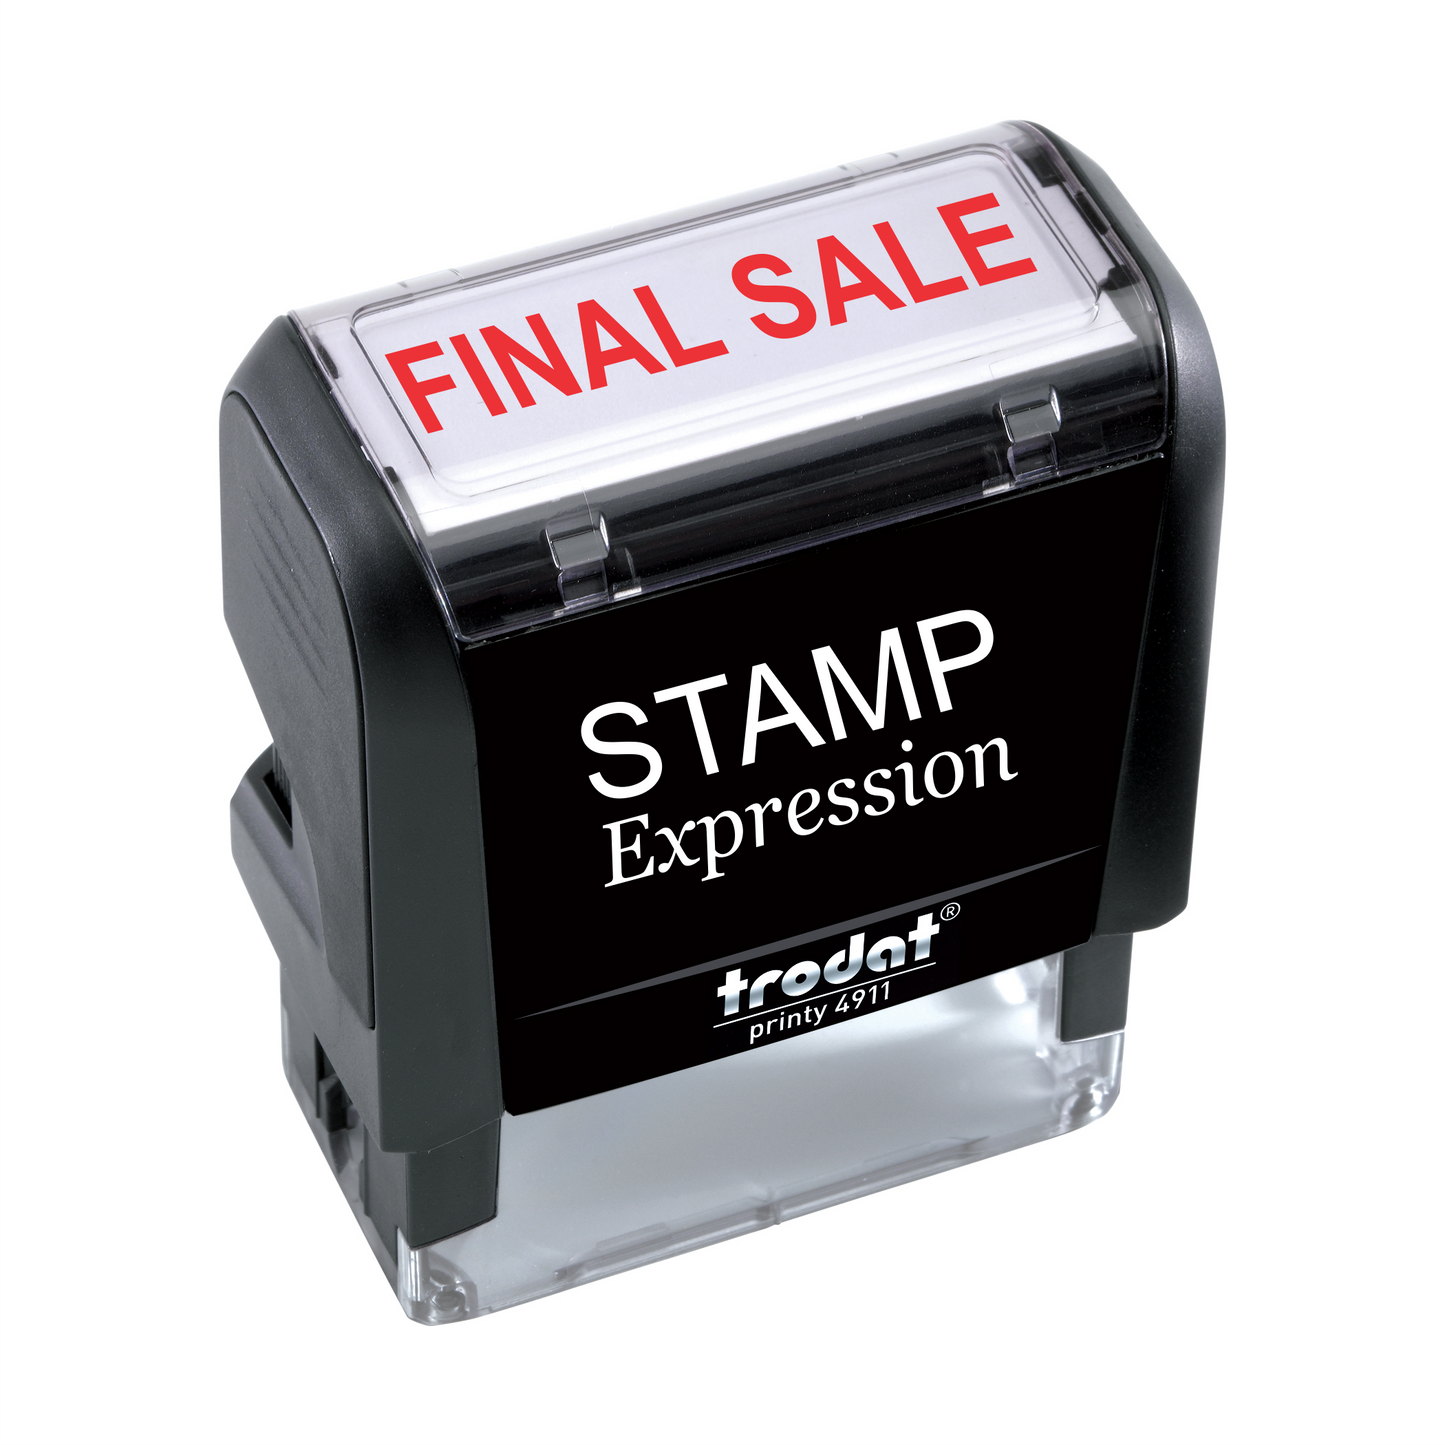 Final Sale Office Self Inking Rubber Stamp (SH-5523)